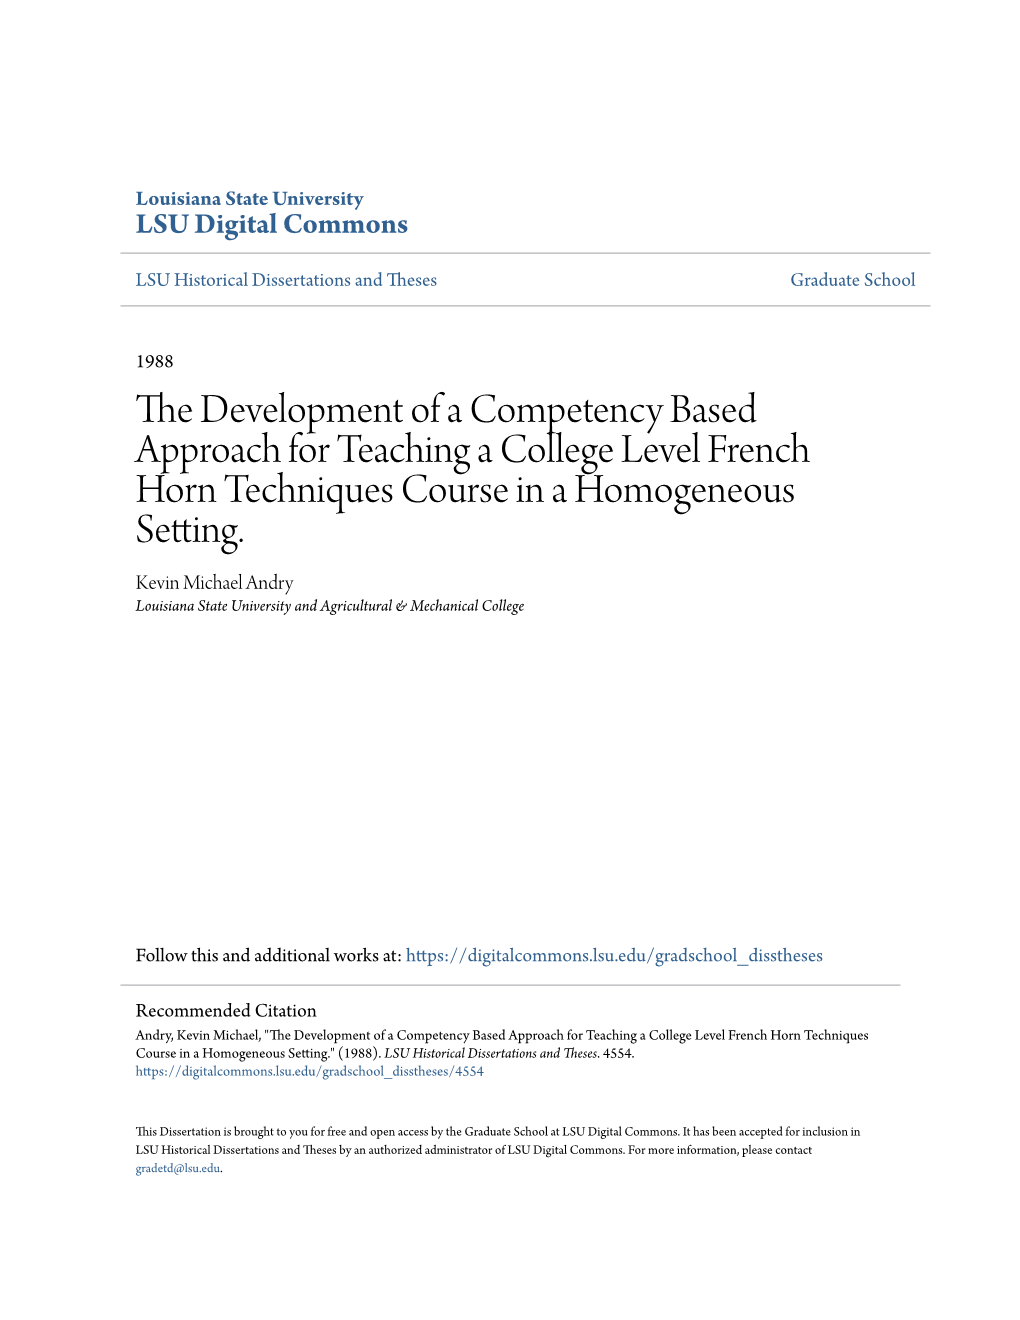 The Development of a Competency Based Approach for Teaching a College Level French Horn Techniques Course in a Homogeneous Setti